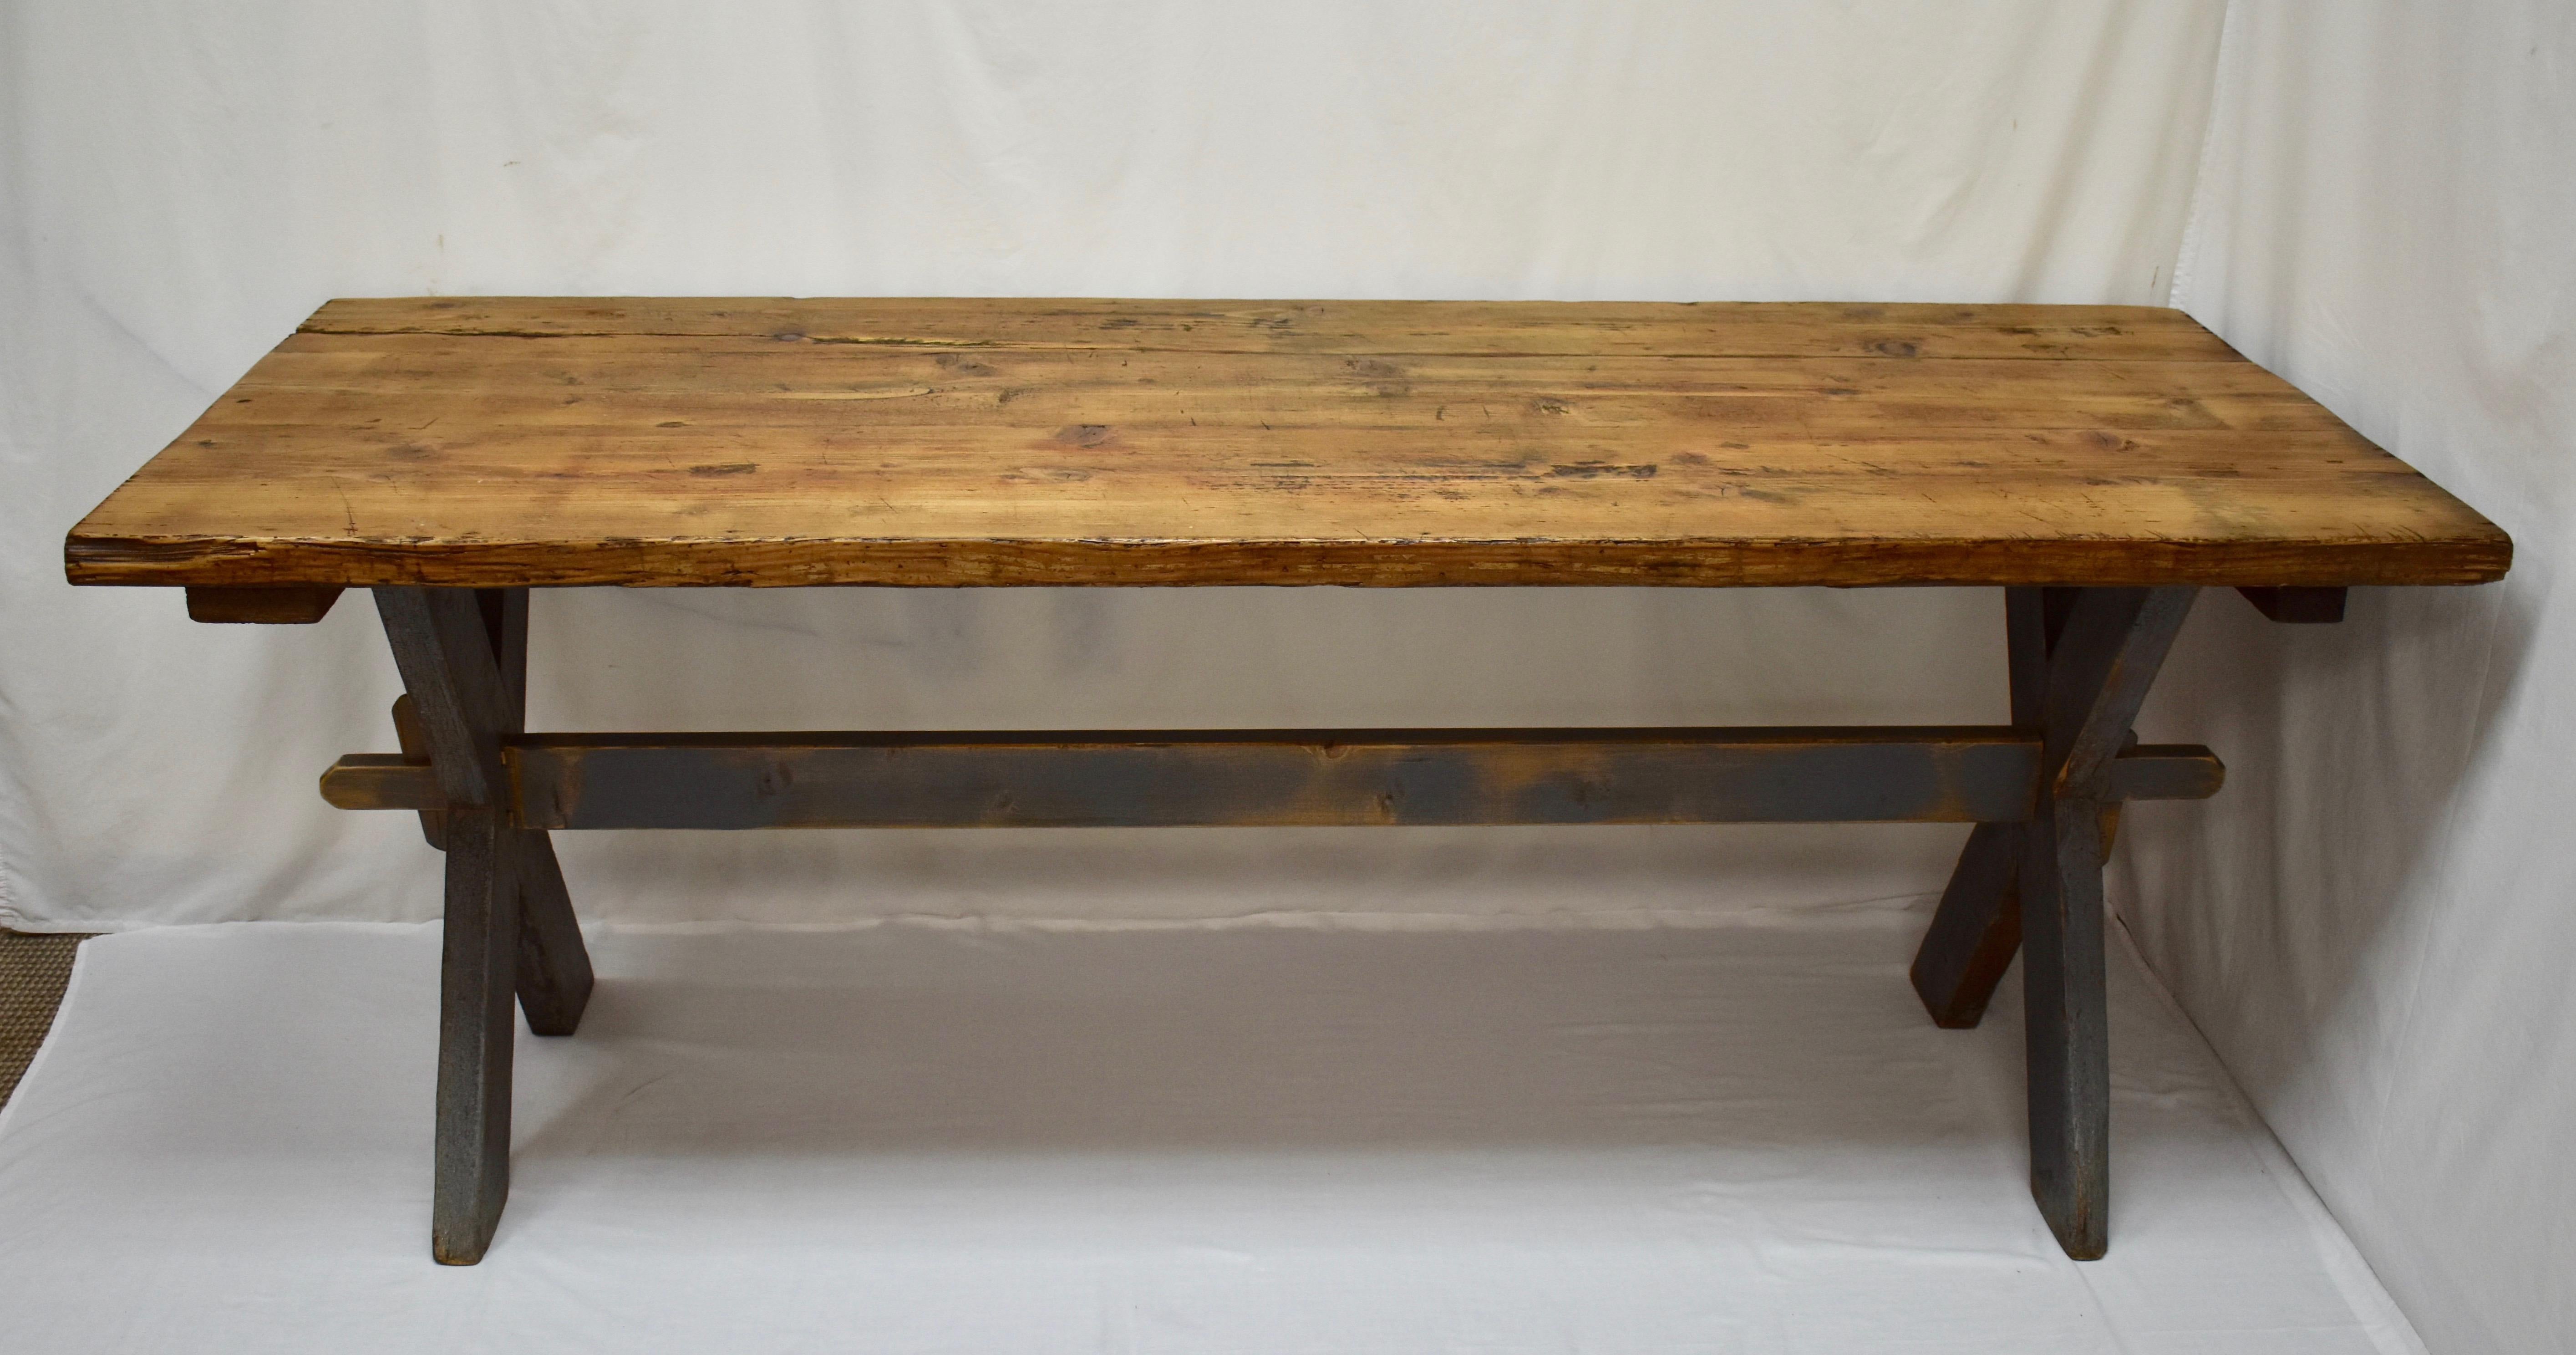 This is a great old rustic trestle table with lots of character. The three board top, almost two inches thick, is magnificently gnarled, scratched and scraped with some significant chips to the edges and one old crack that has worn into a channel